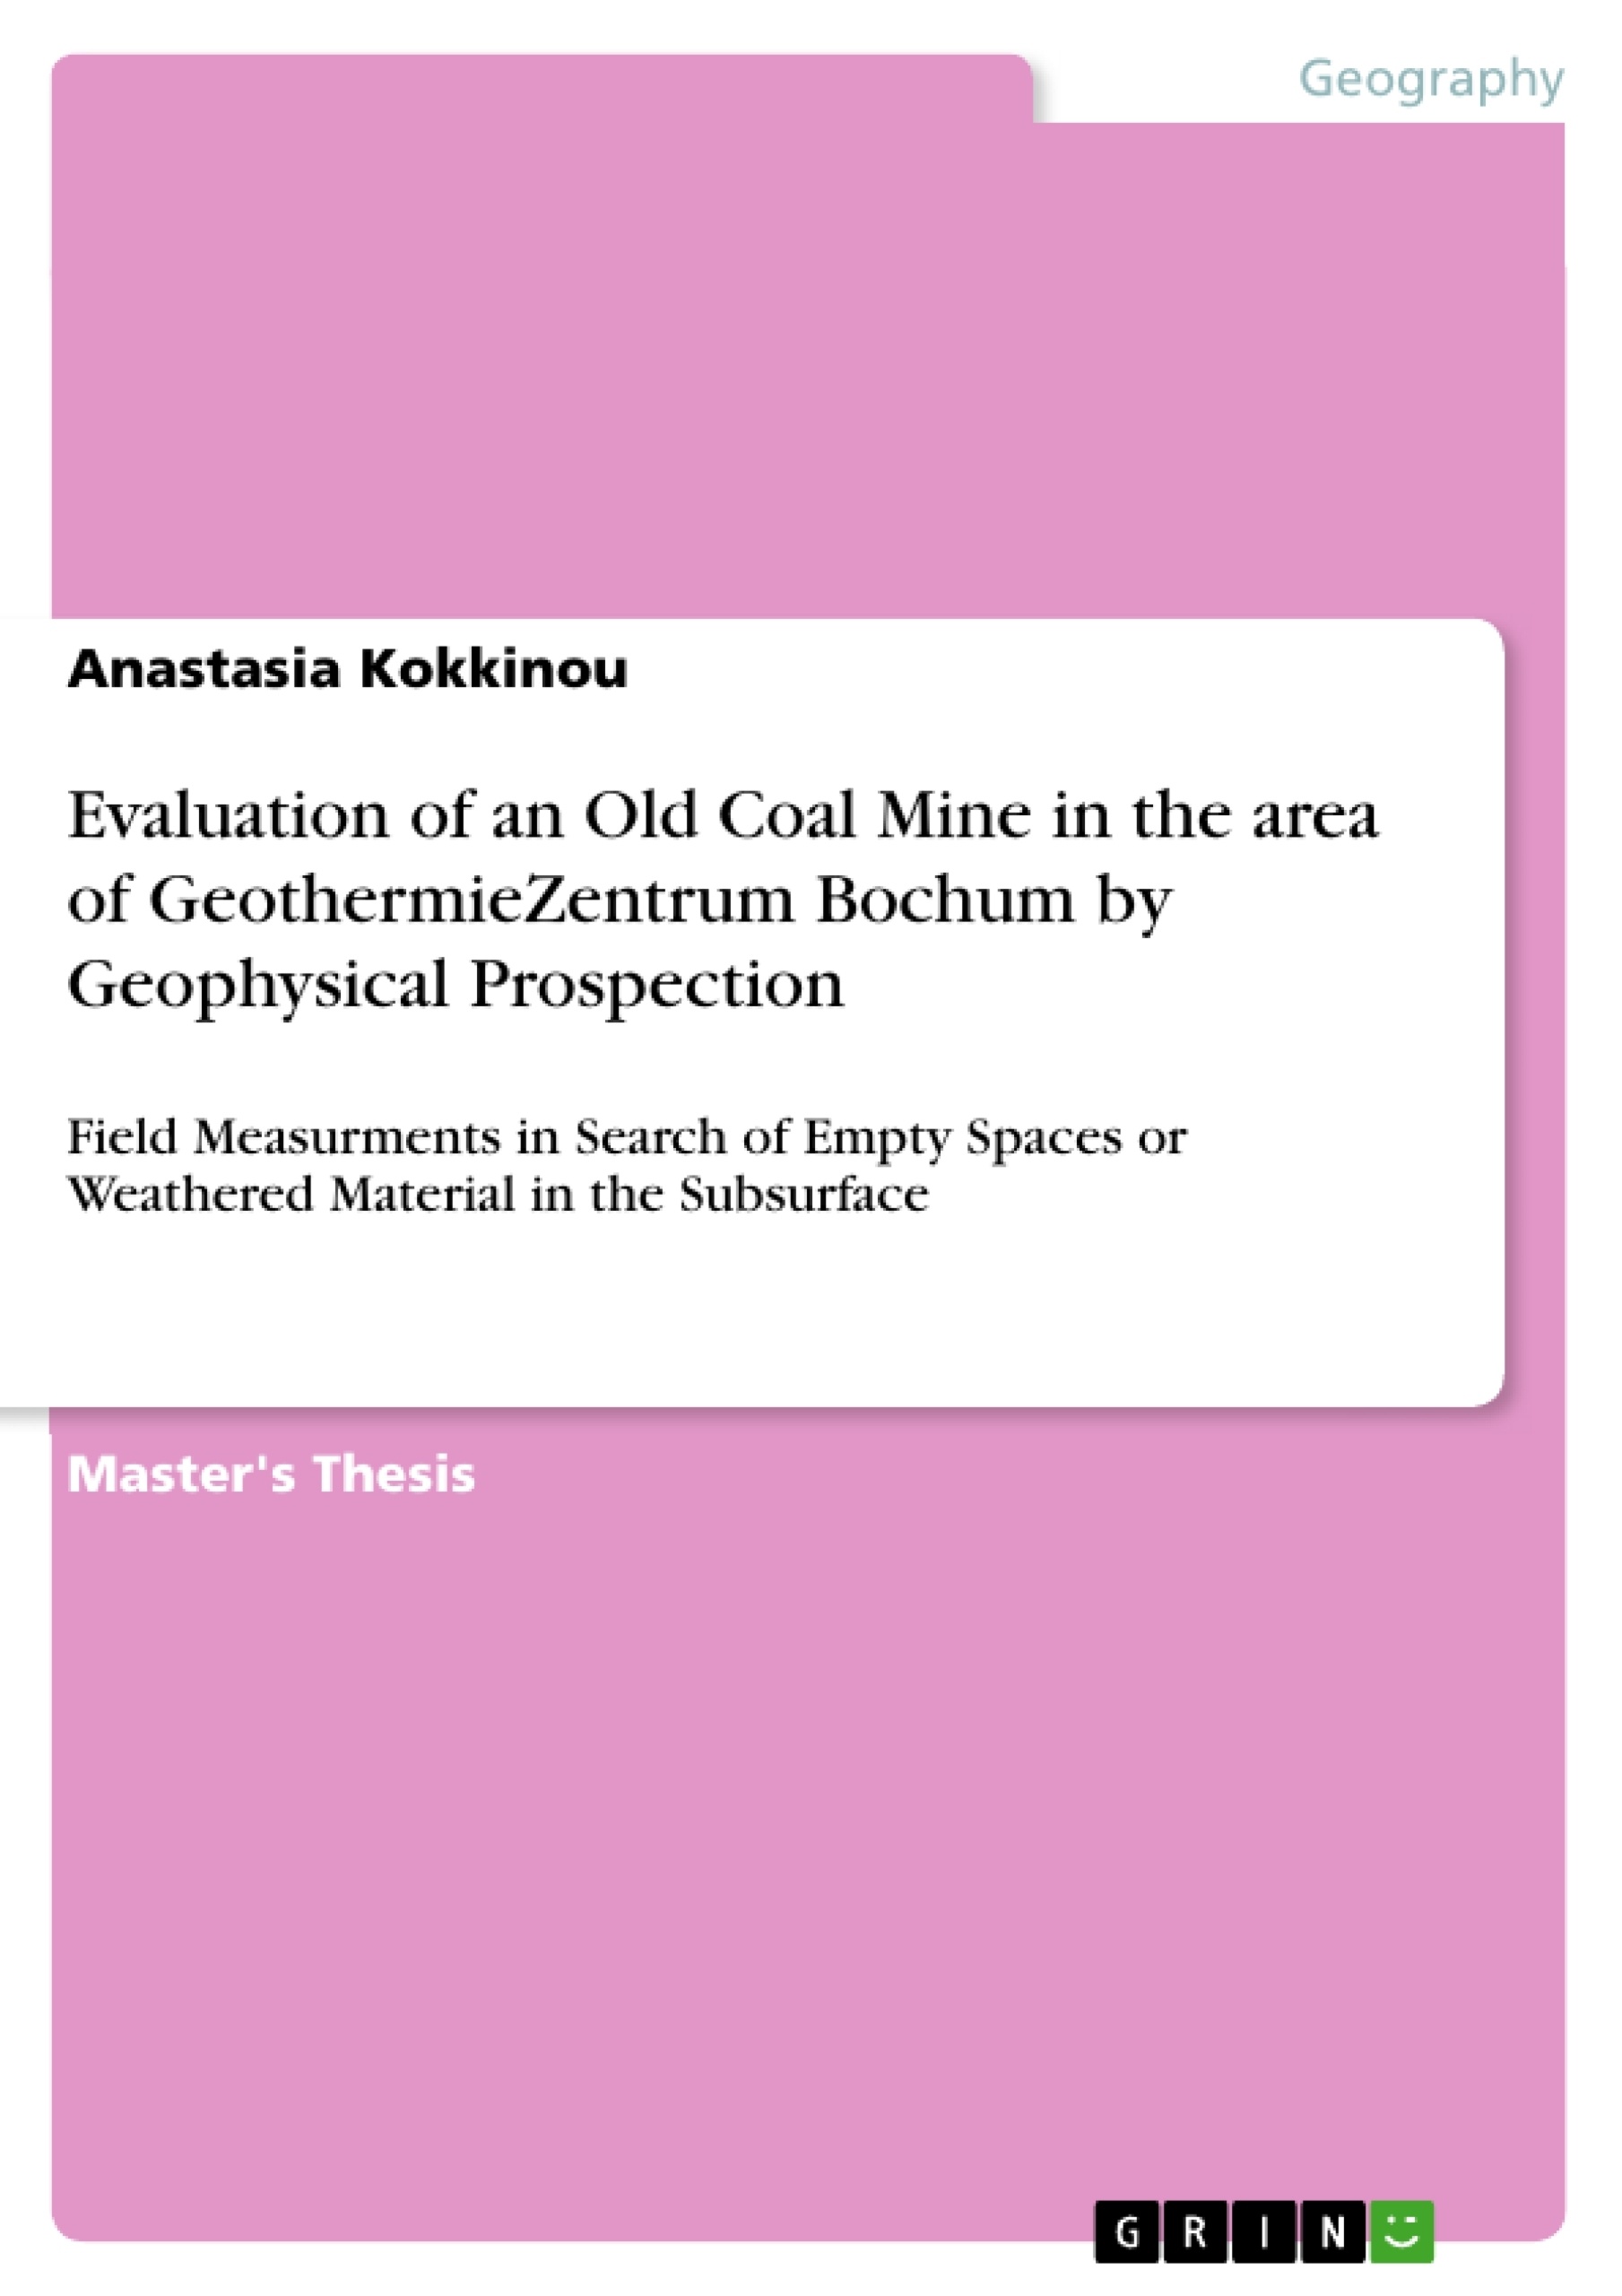 Title: Evaluation of an Old Coal Mine in the area of GeothermieZentrum Bochum by Geophysical Prospection